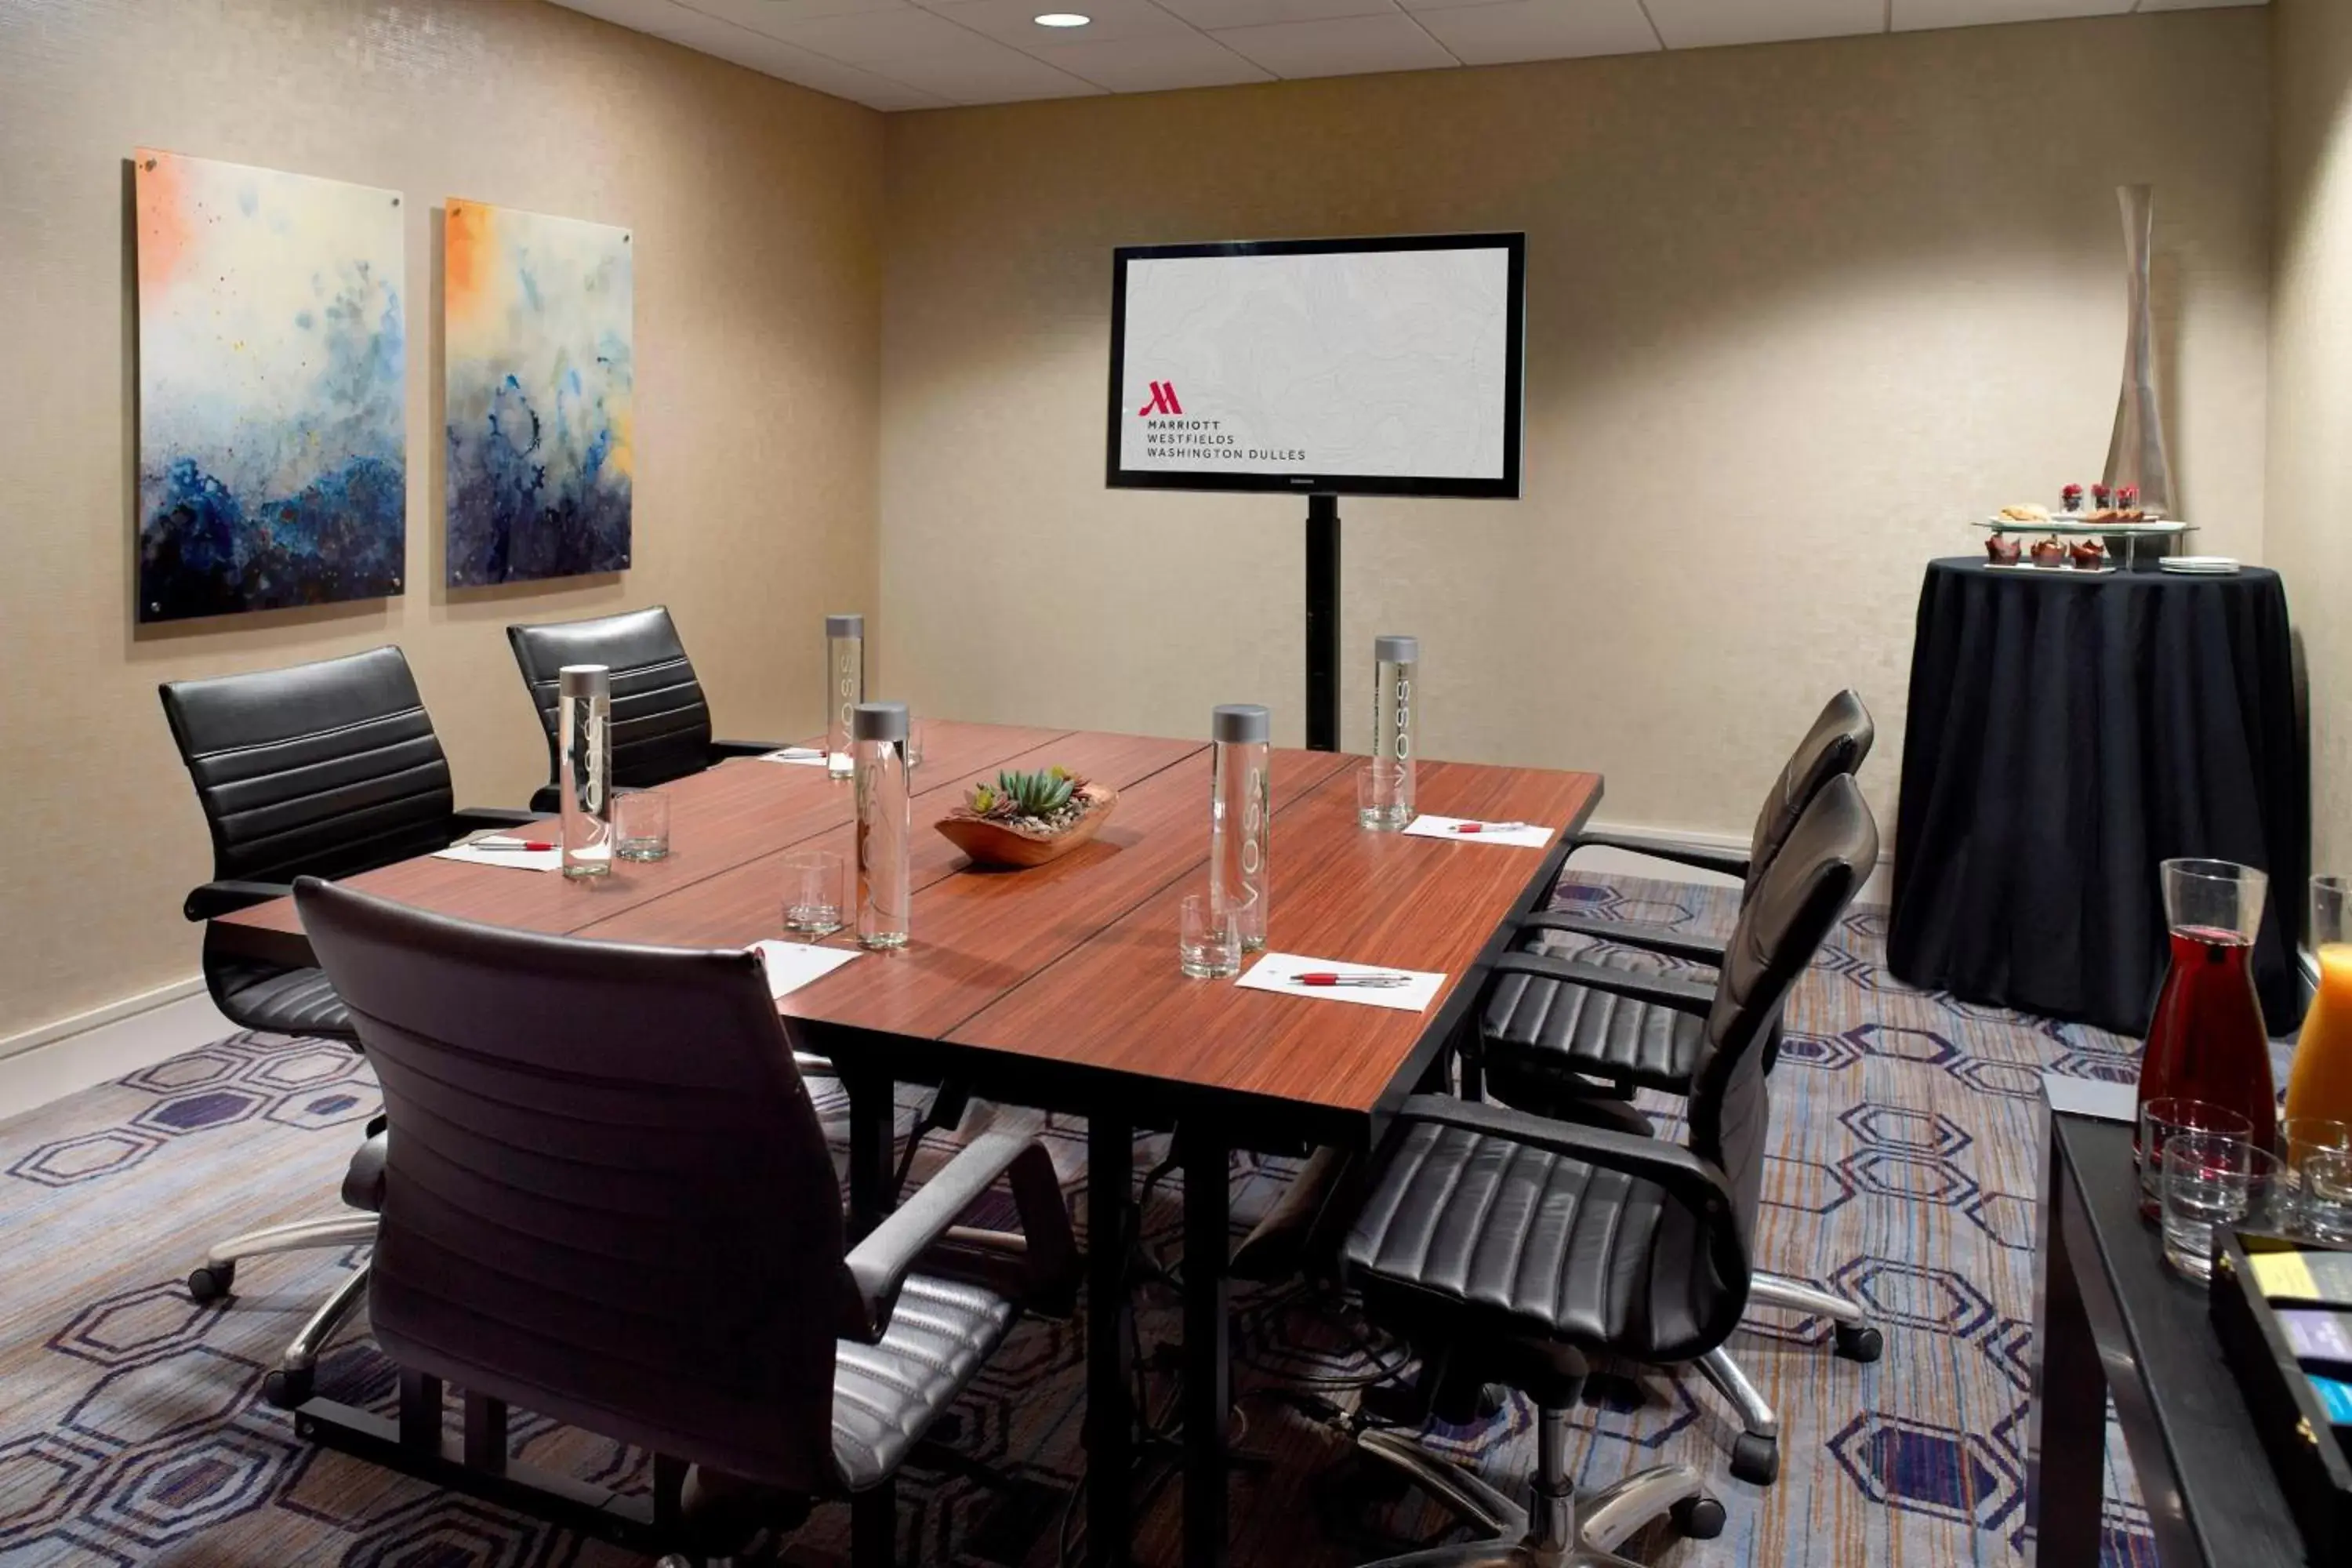 Meeting/conference room in Westfields Marriott Washington Dulles